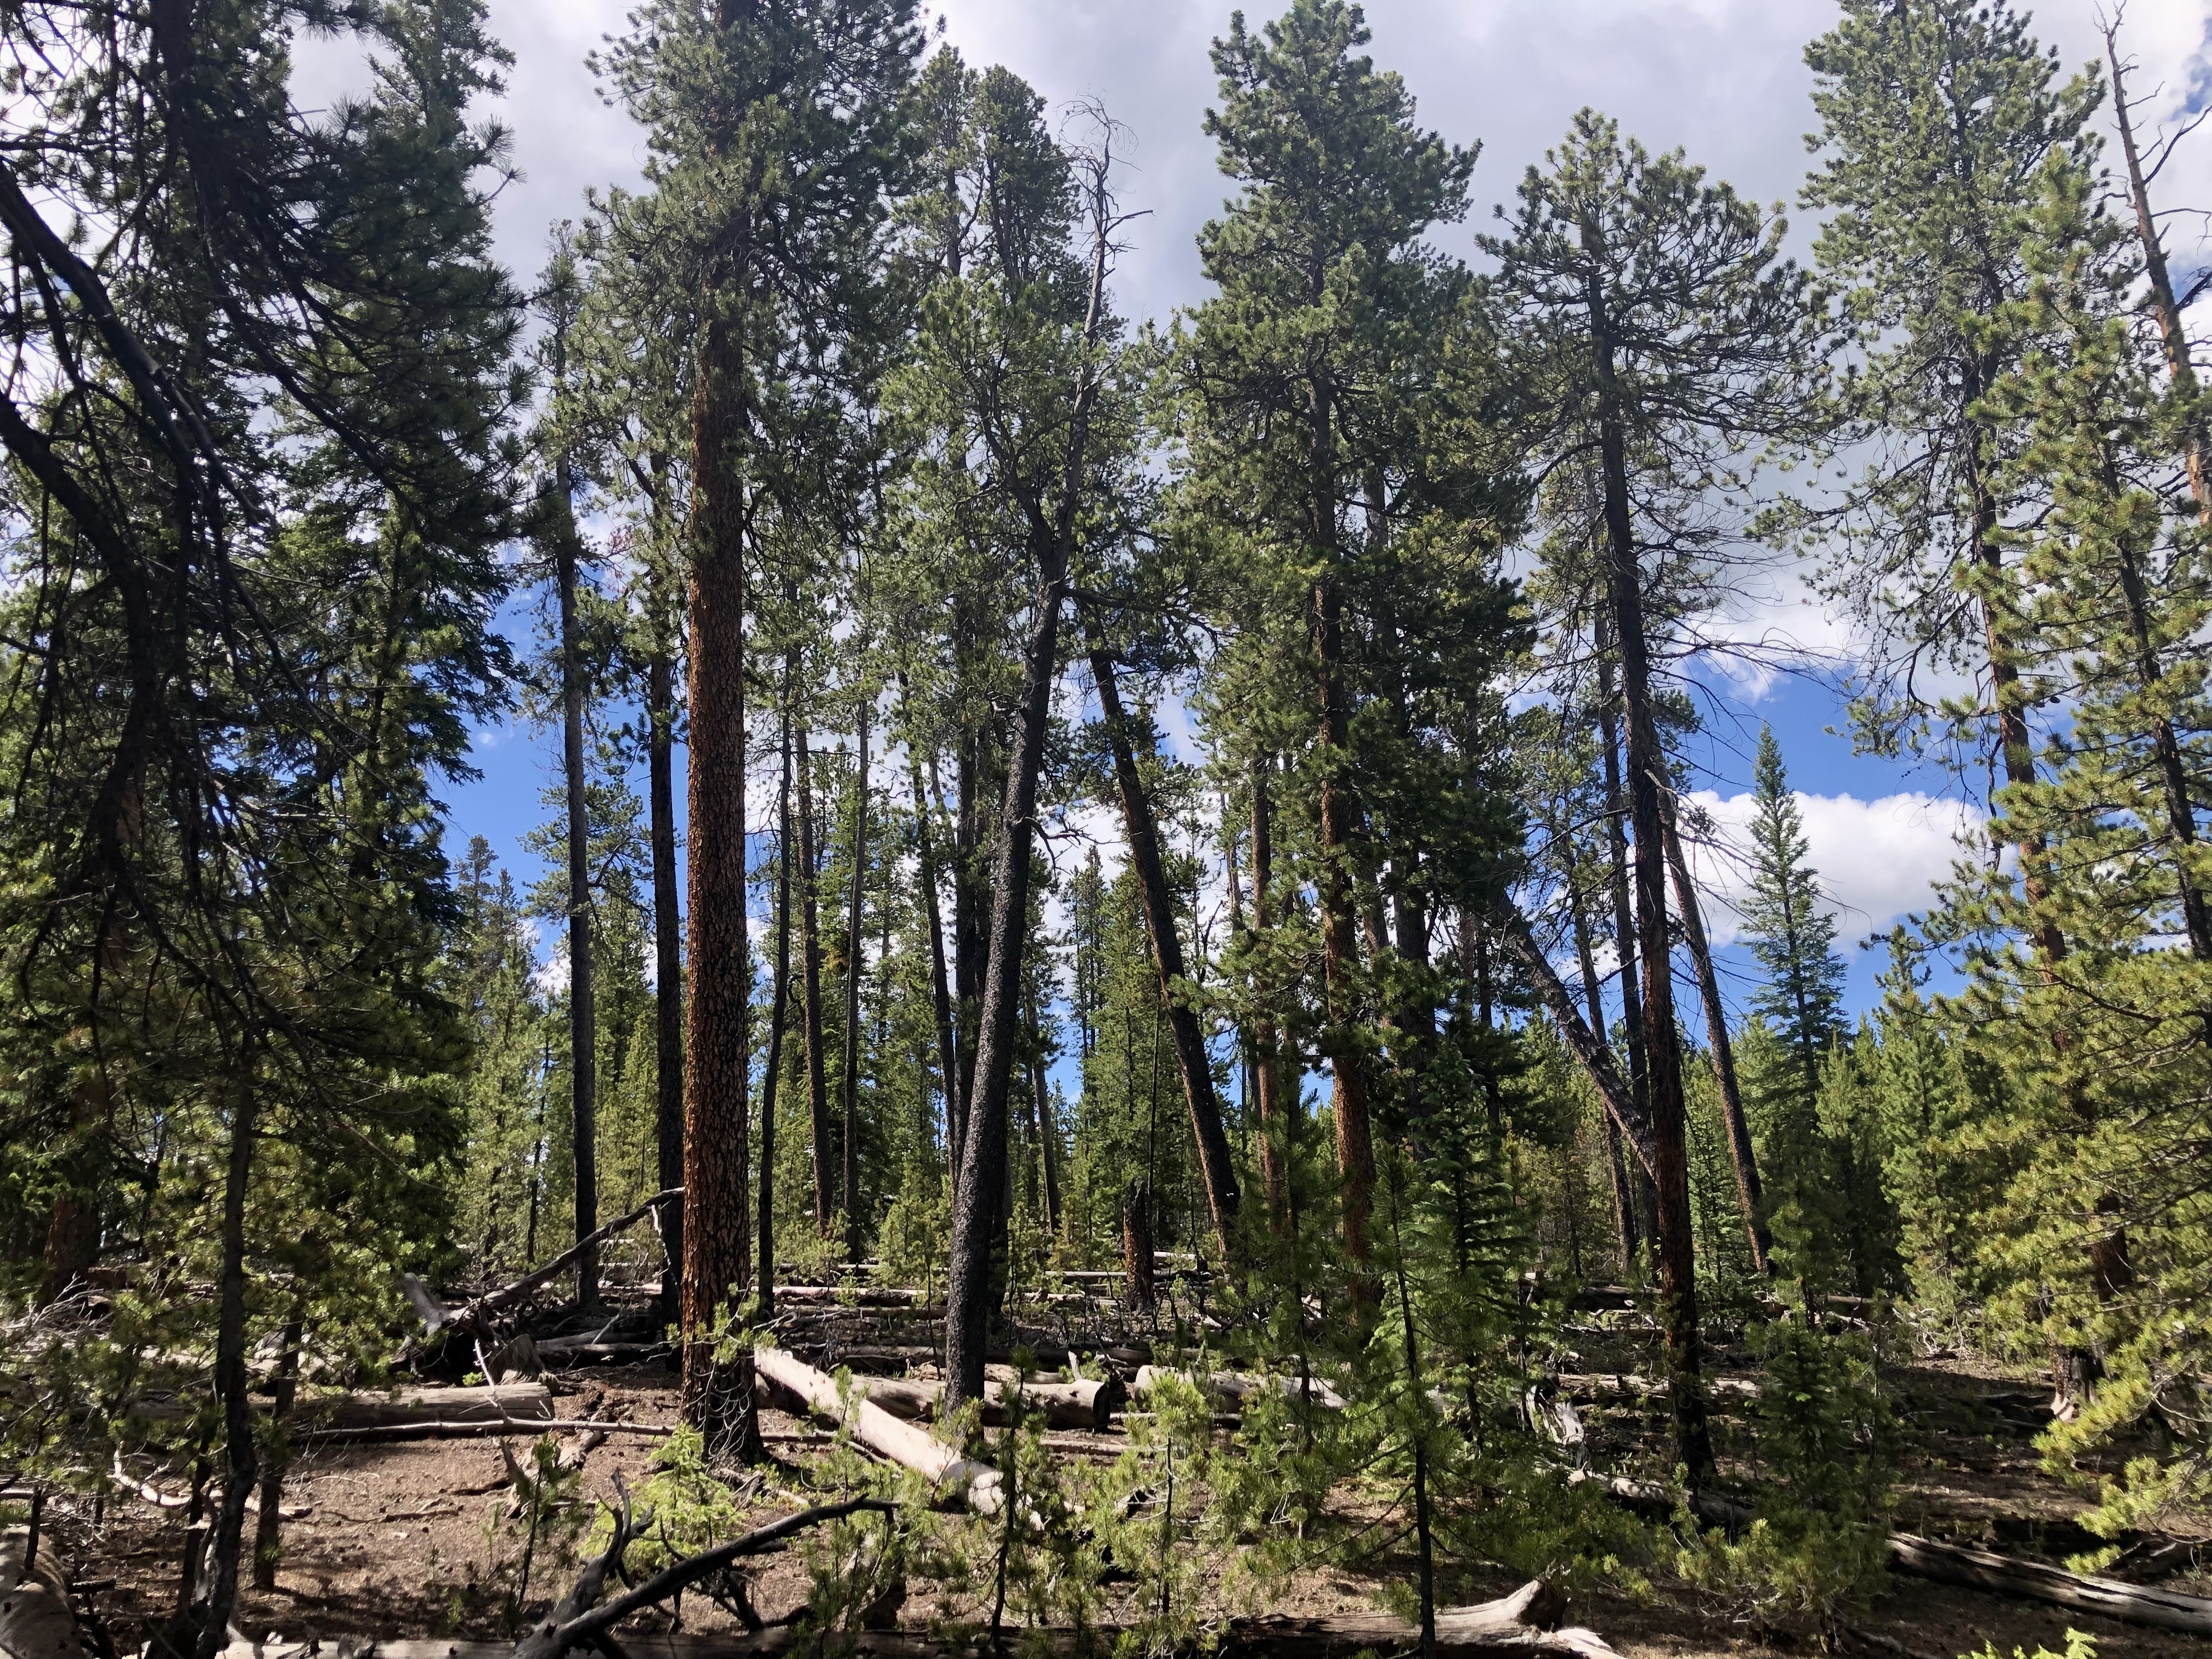 The resilience treatment will maintain lodgepole pine as dominant species